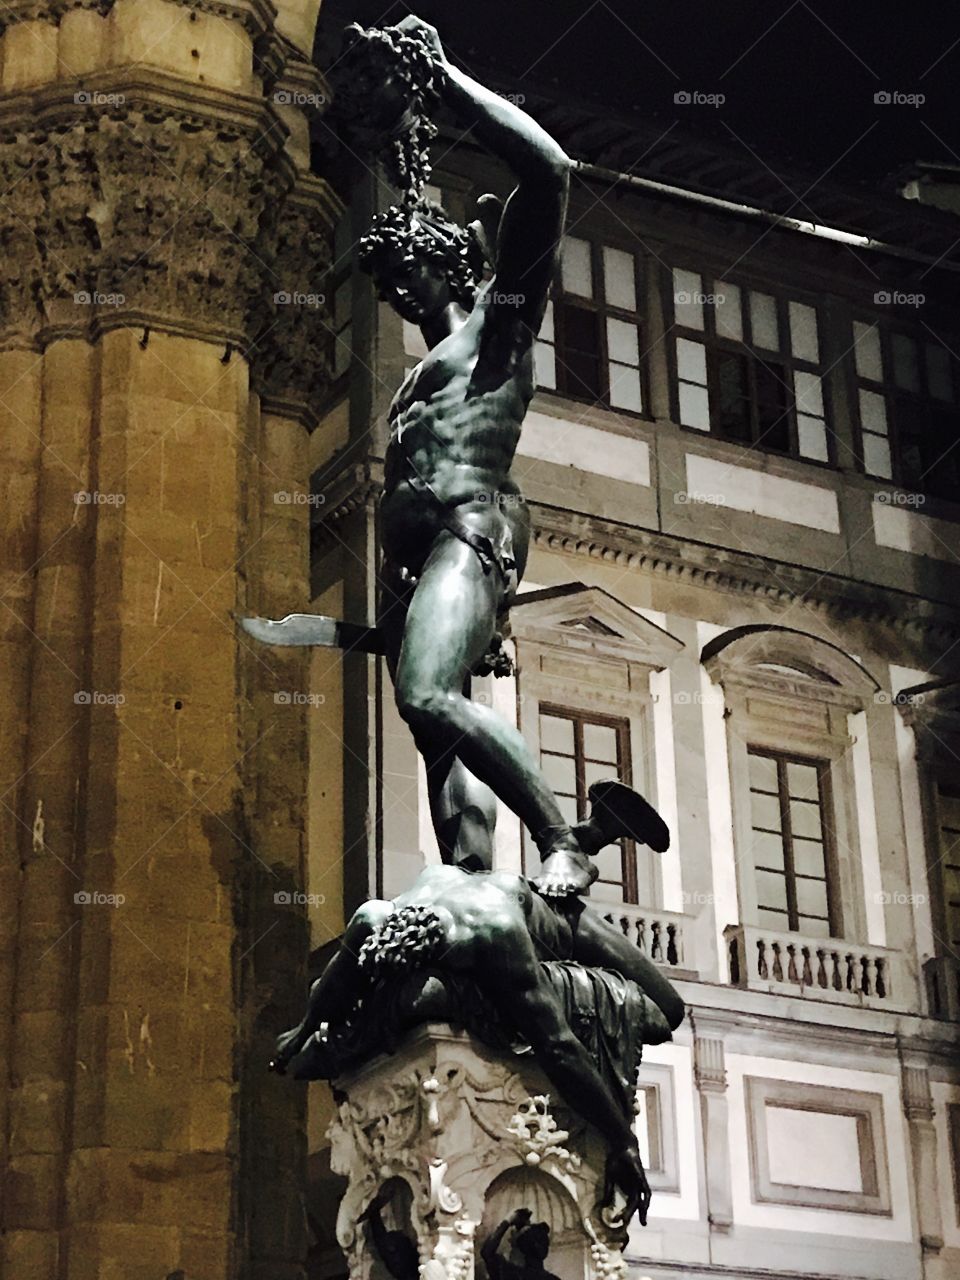 Greek Myths in the square in Florence...Perseus take Medusa’s head